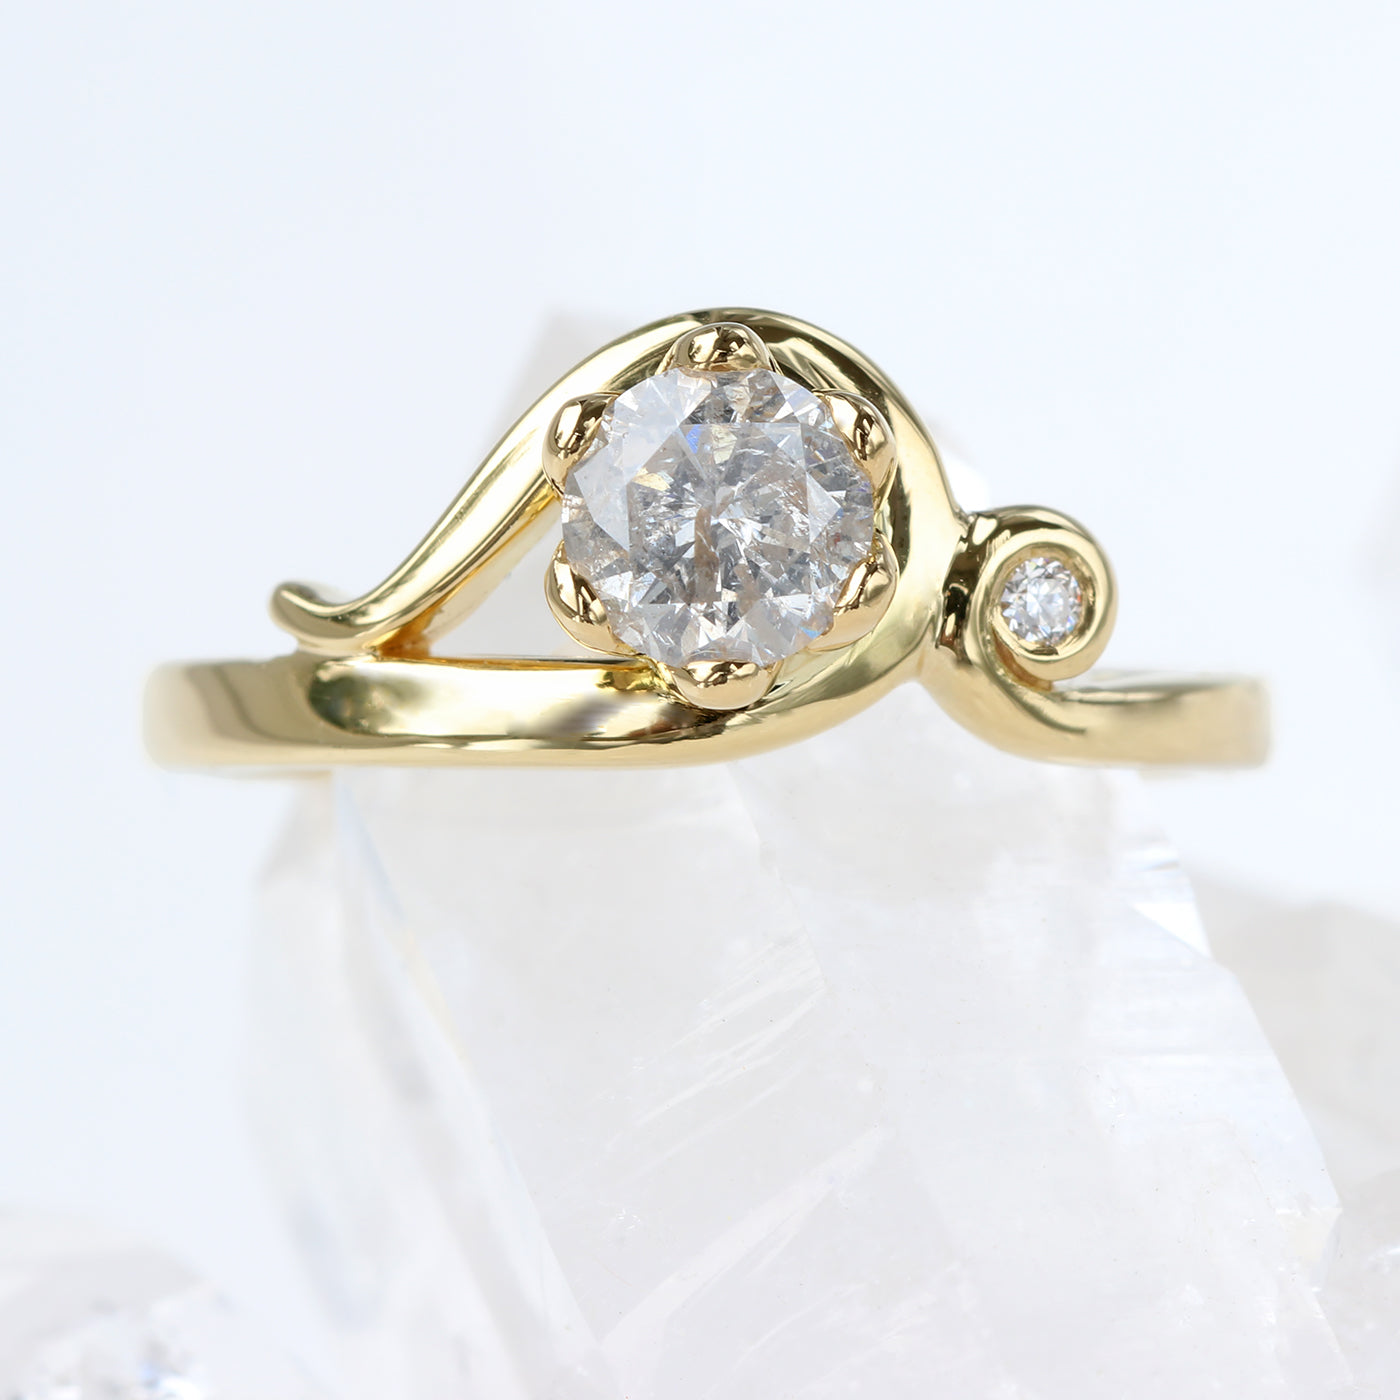 18ct Gold Icy Diamond Art Nouveau Inspired Ring (Size M, Resize J - P)